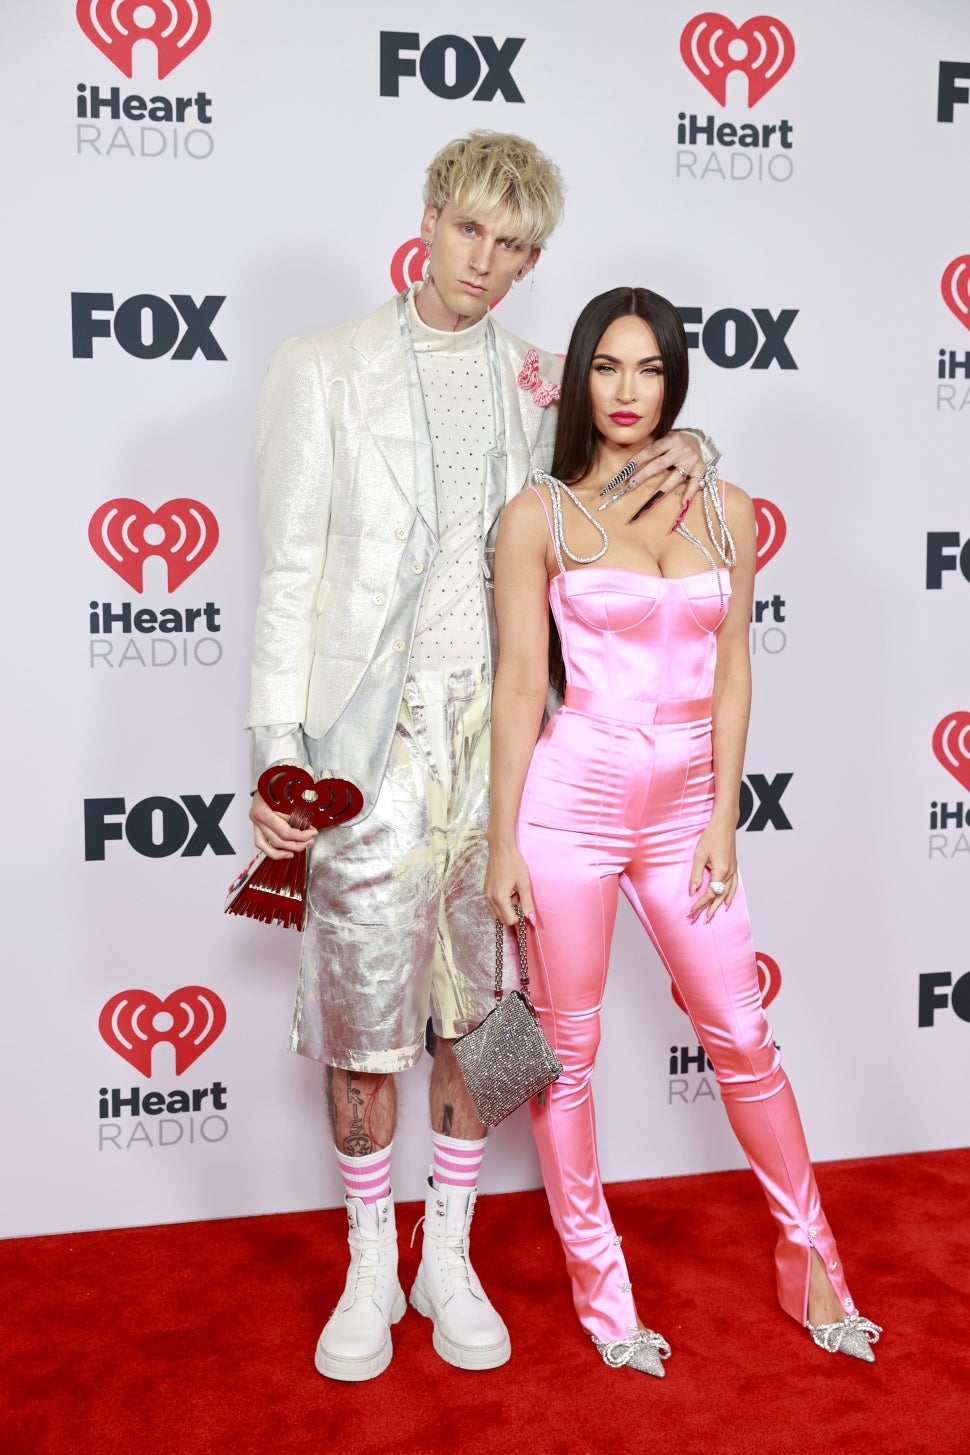 Machine Gun Kelly Shows Off Super Long Nails on Red Carpet With Megan Fox at 2021 iHeart Radio Awards | Entertainment Tonight